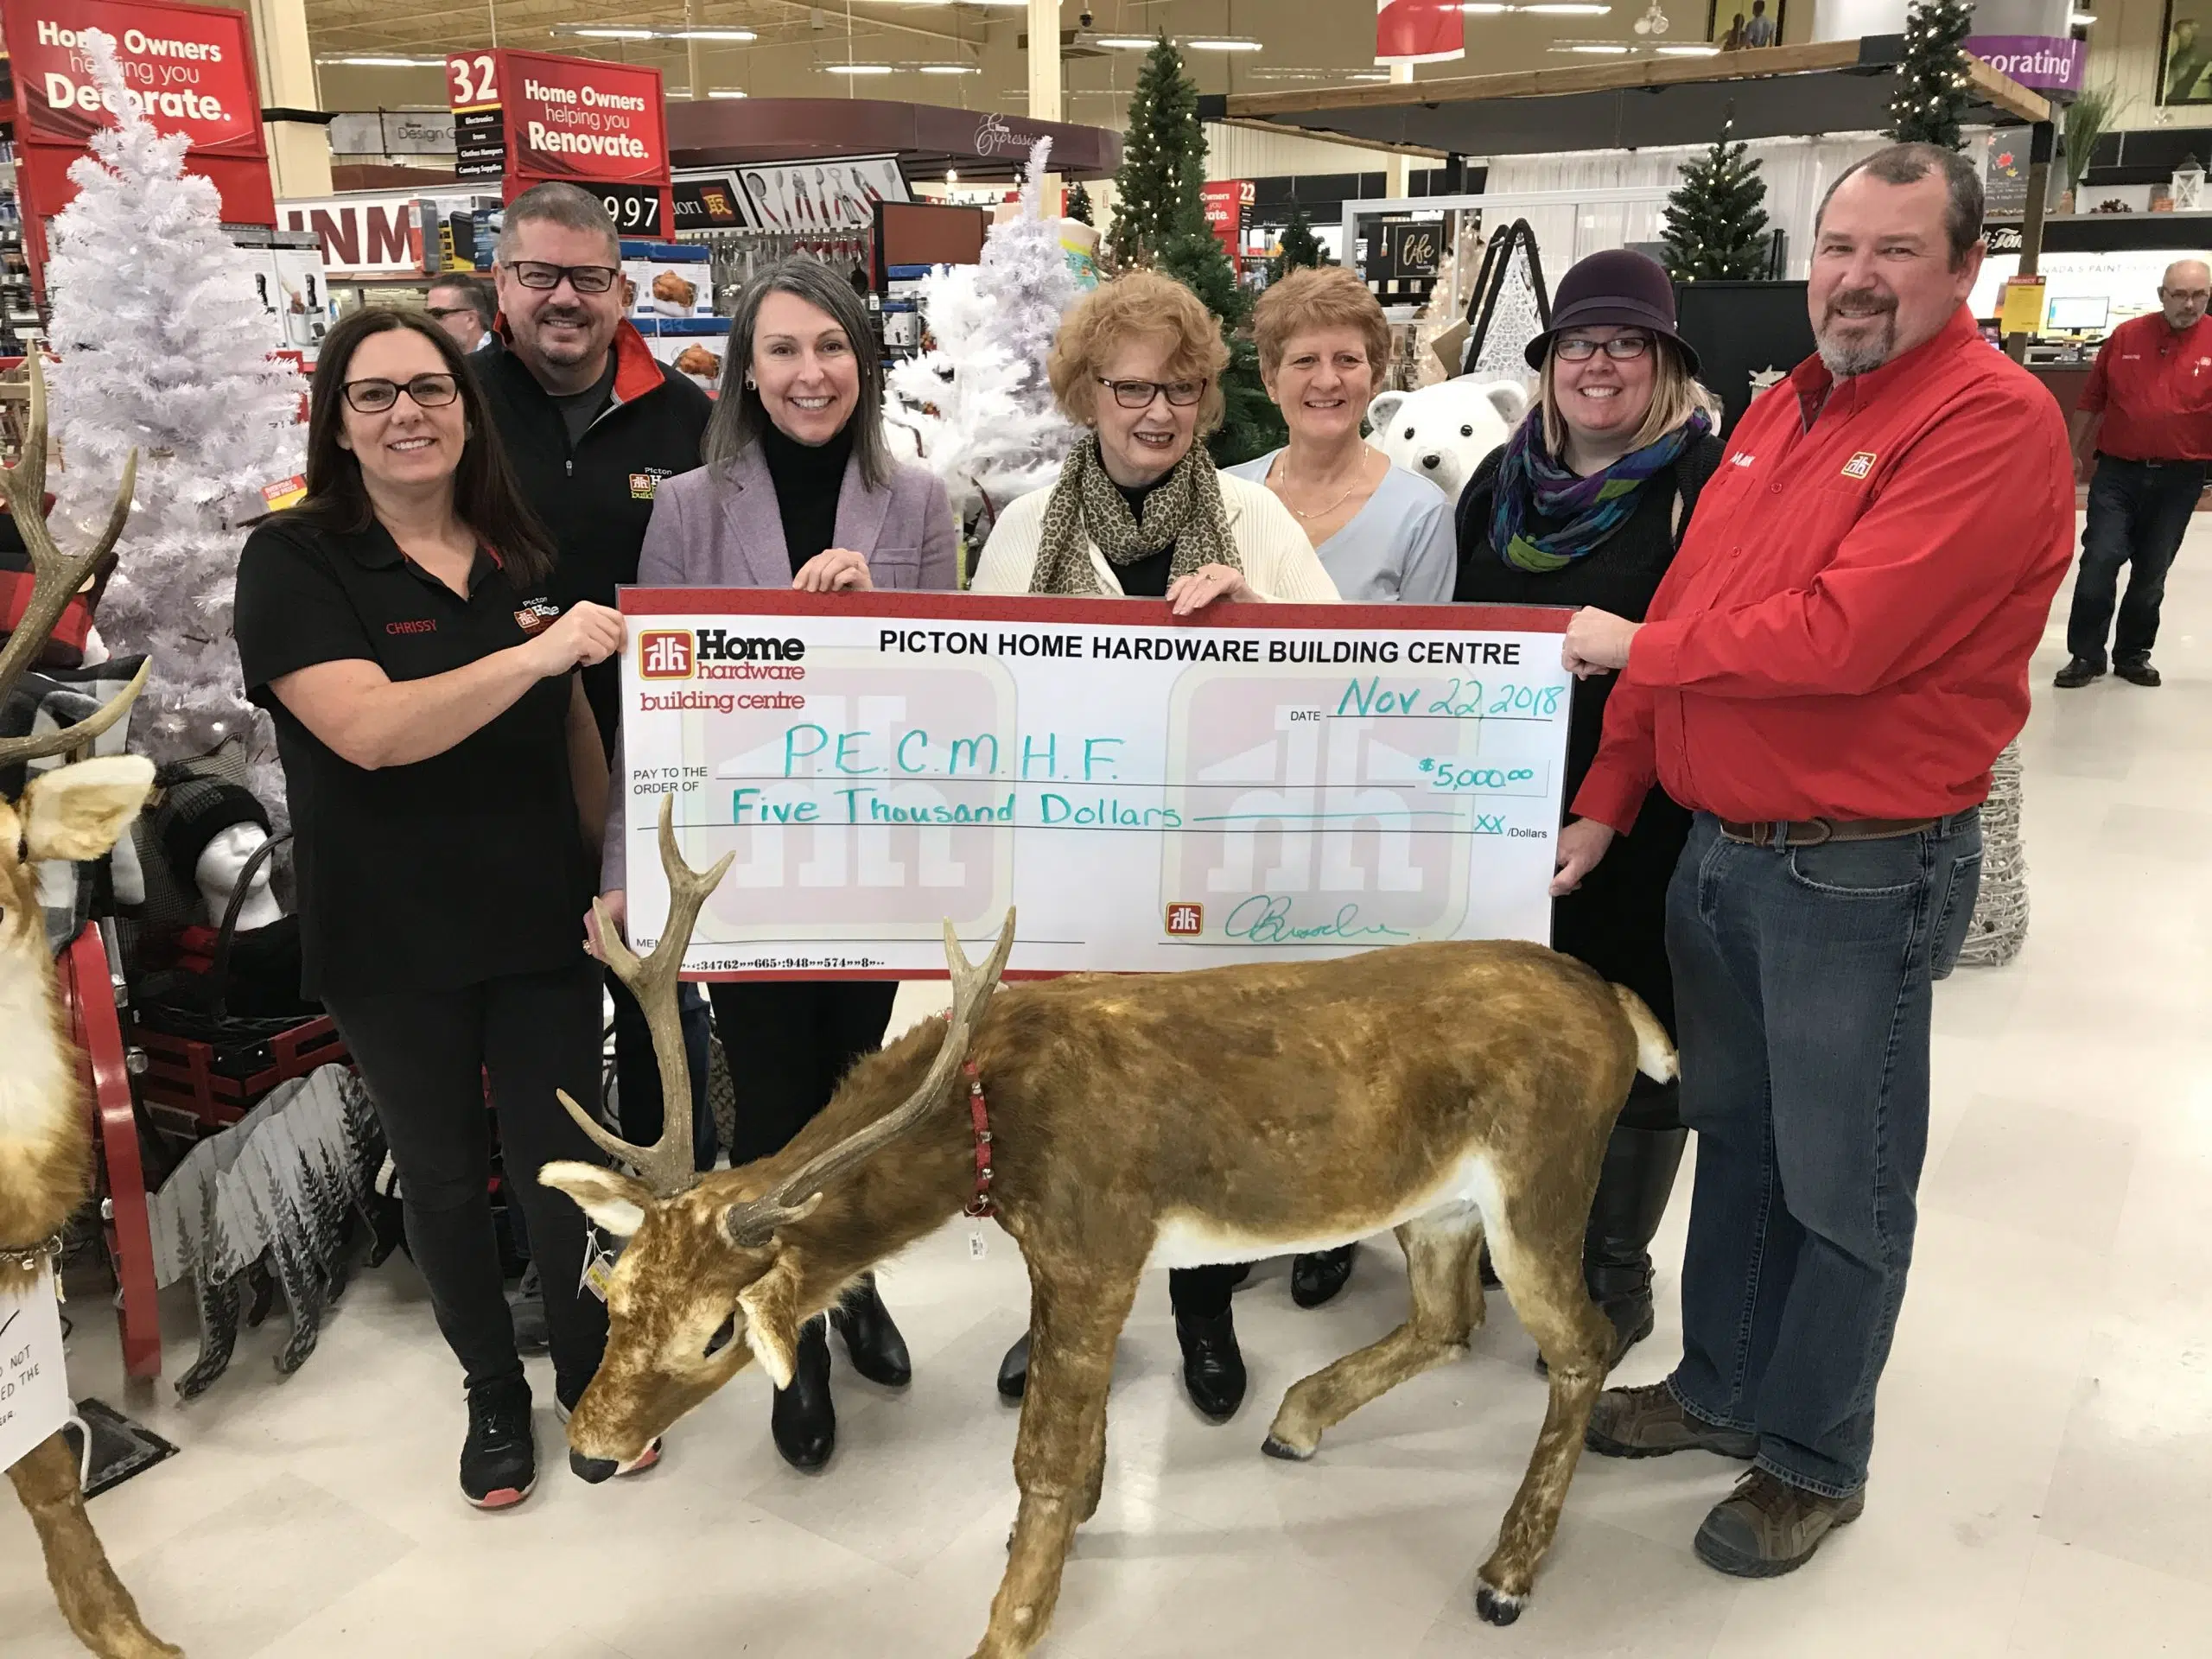 Picton Home Hardware donates $5,000 to Back The Build Campaign